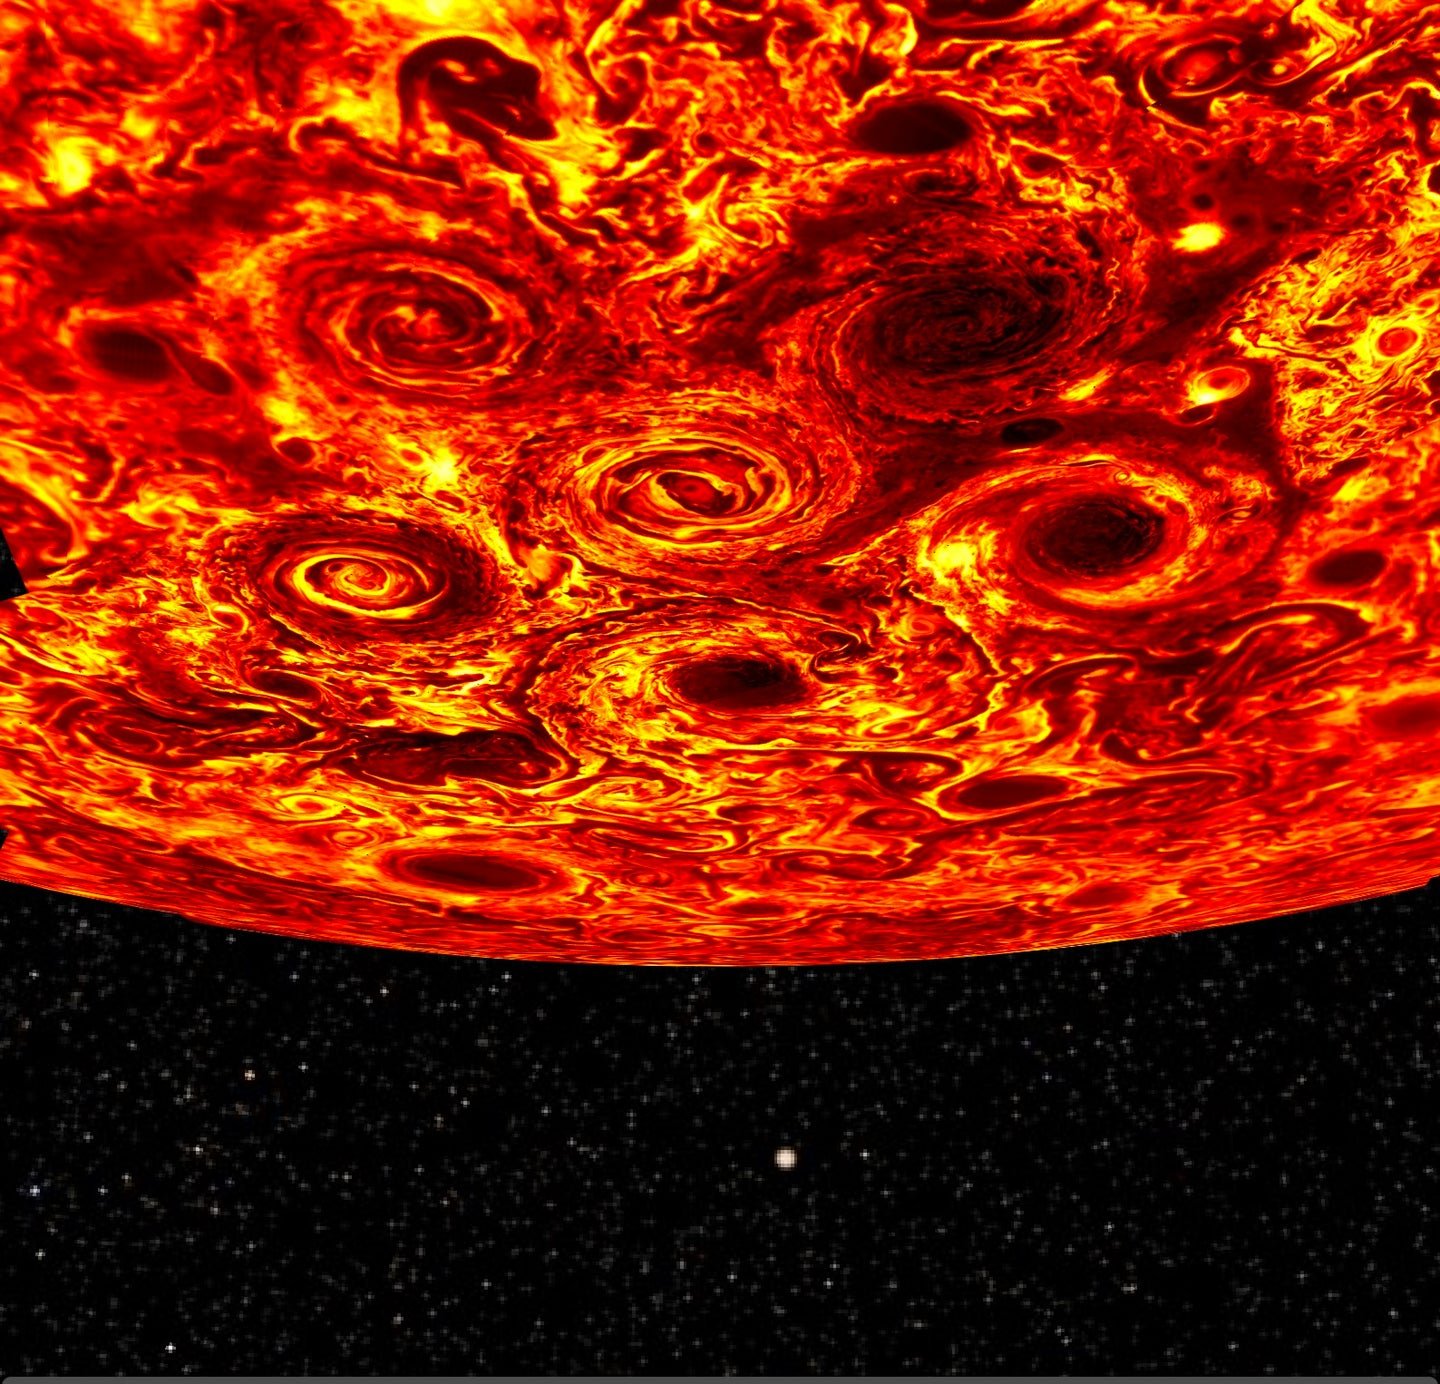 Is this Jupiter, or a pizza? Join our Jovian guessing game.